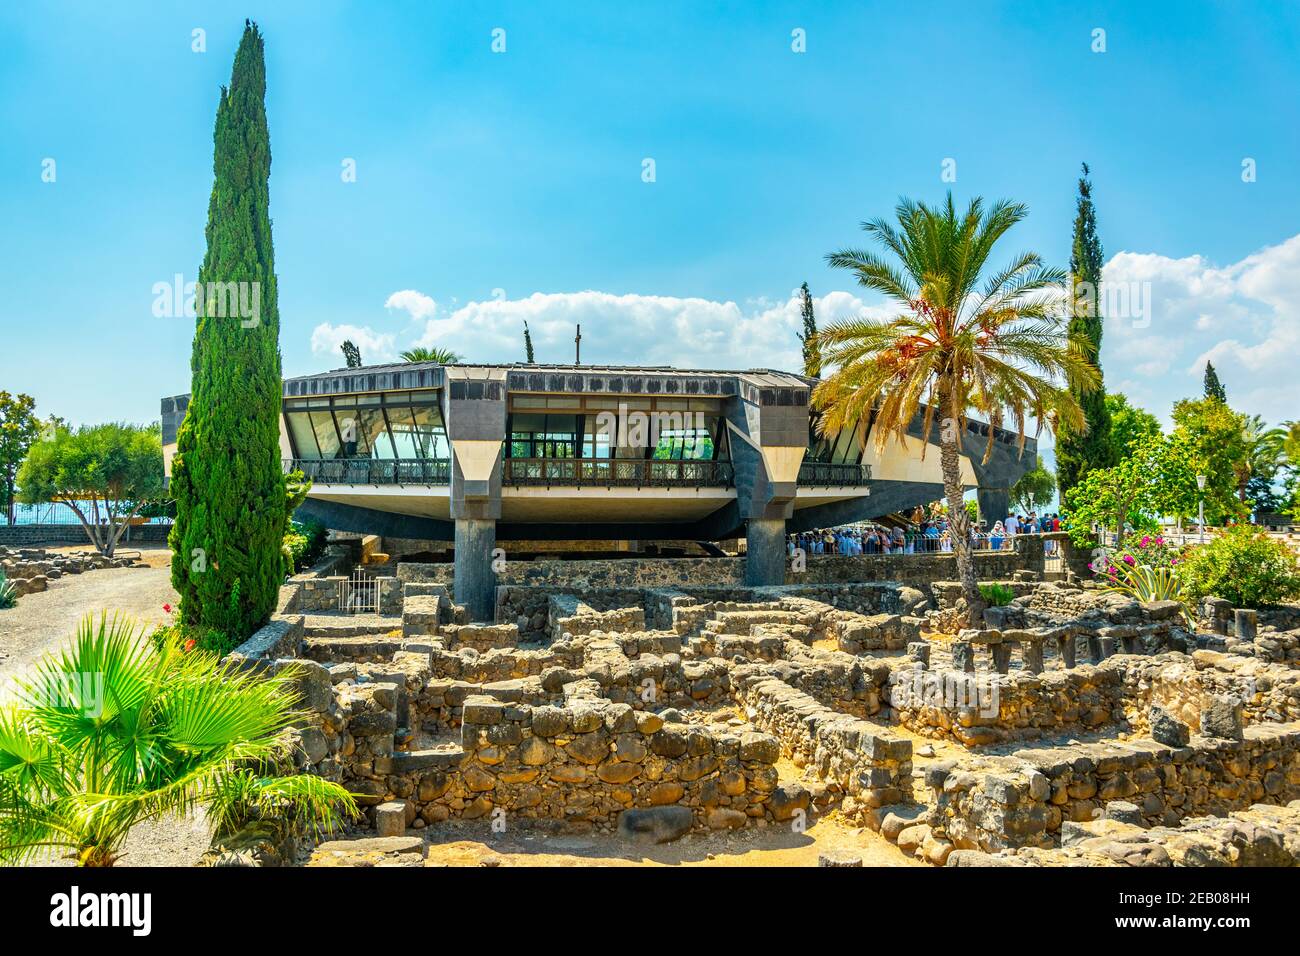 CAPERNAUM, ISRAEL, SEPTEMBER 15, 2018: View of a modern church inside of the Capernaum complex in Israel Stock Photo